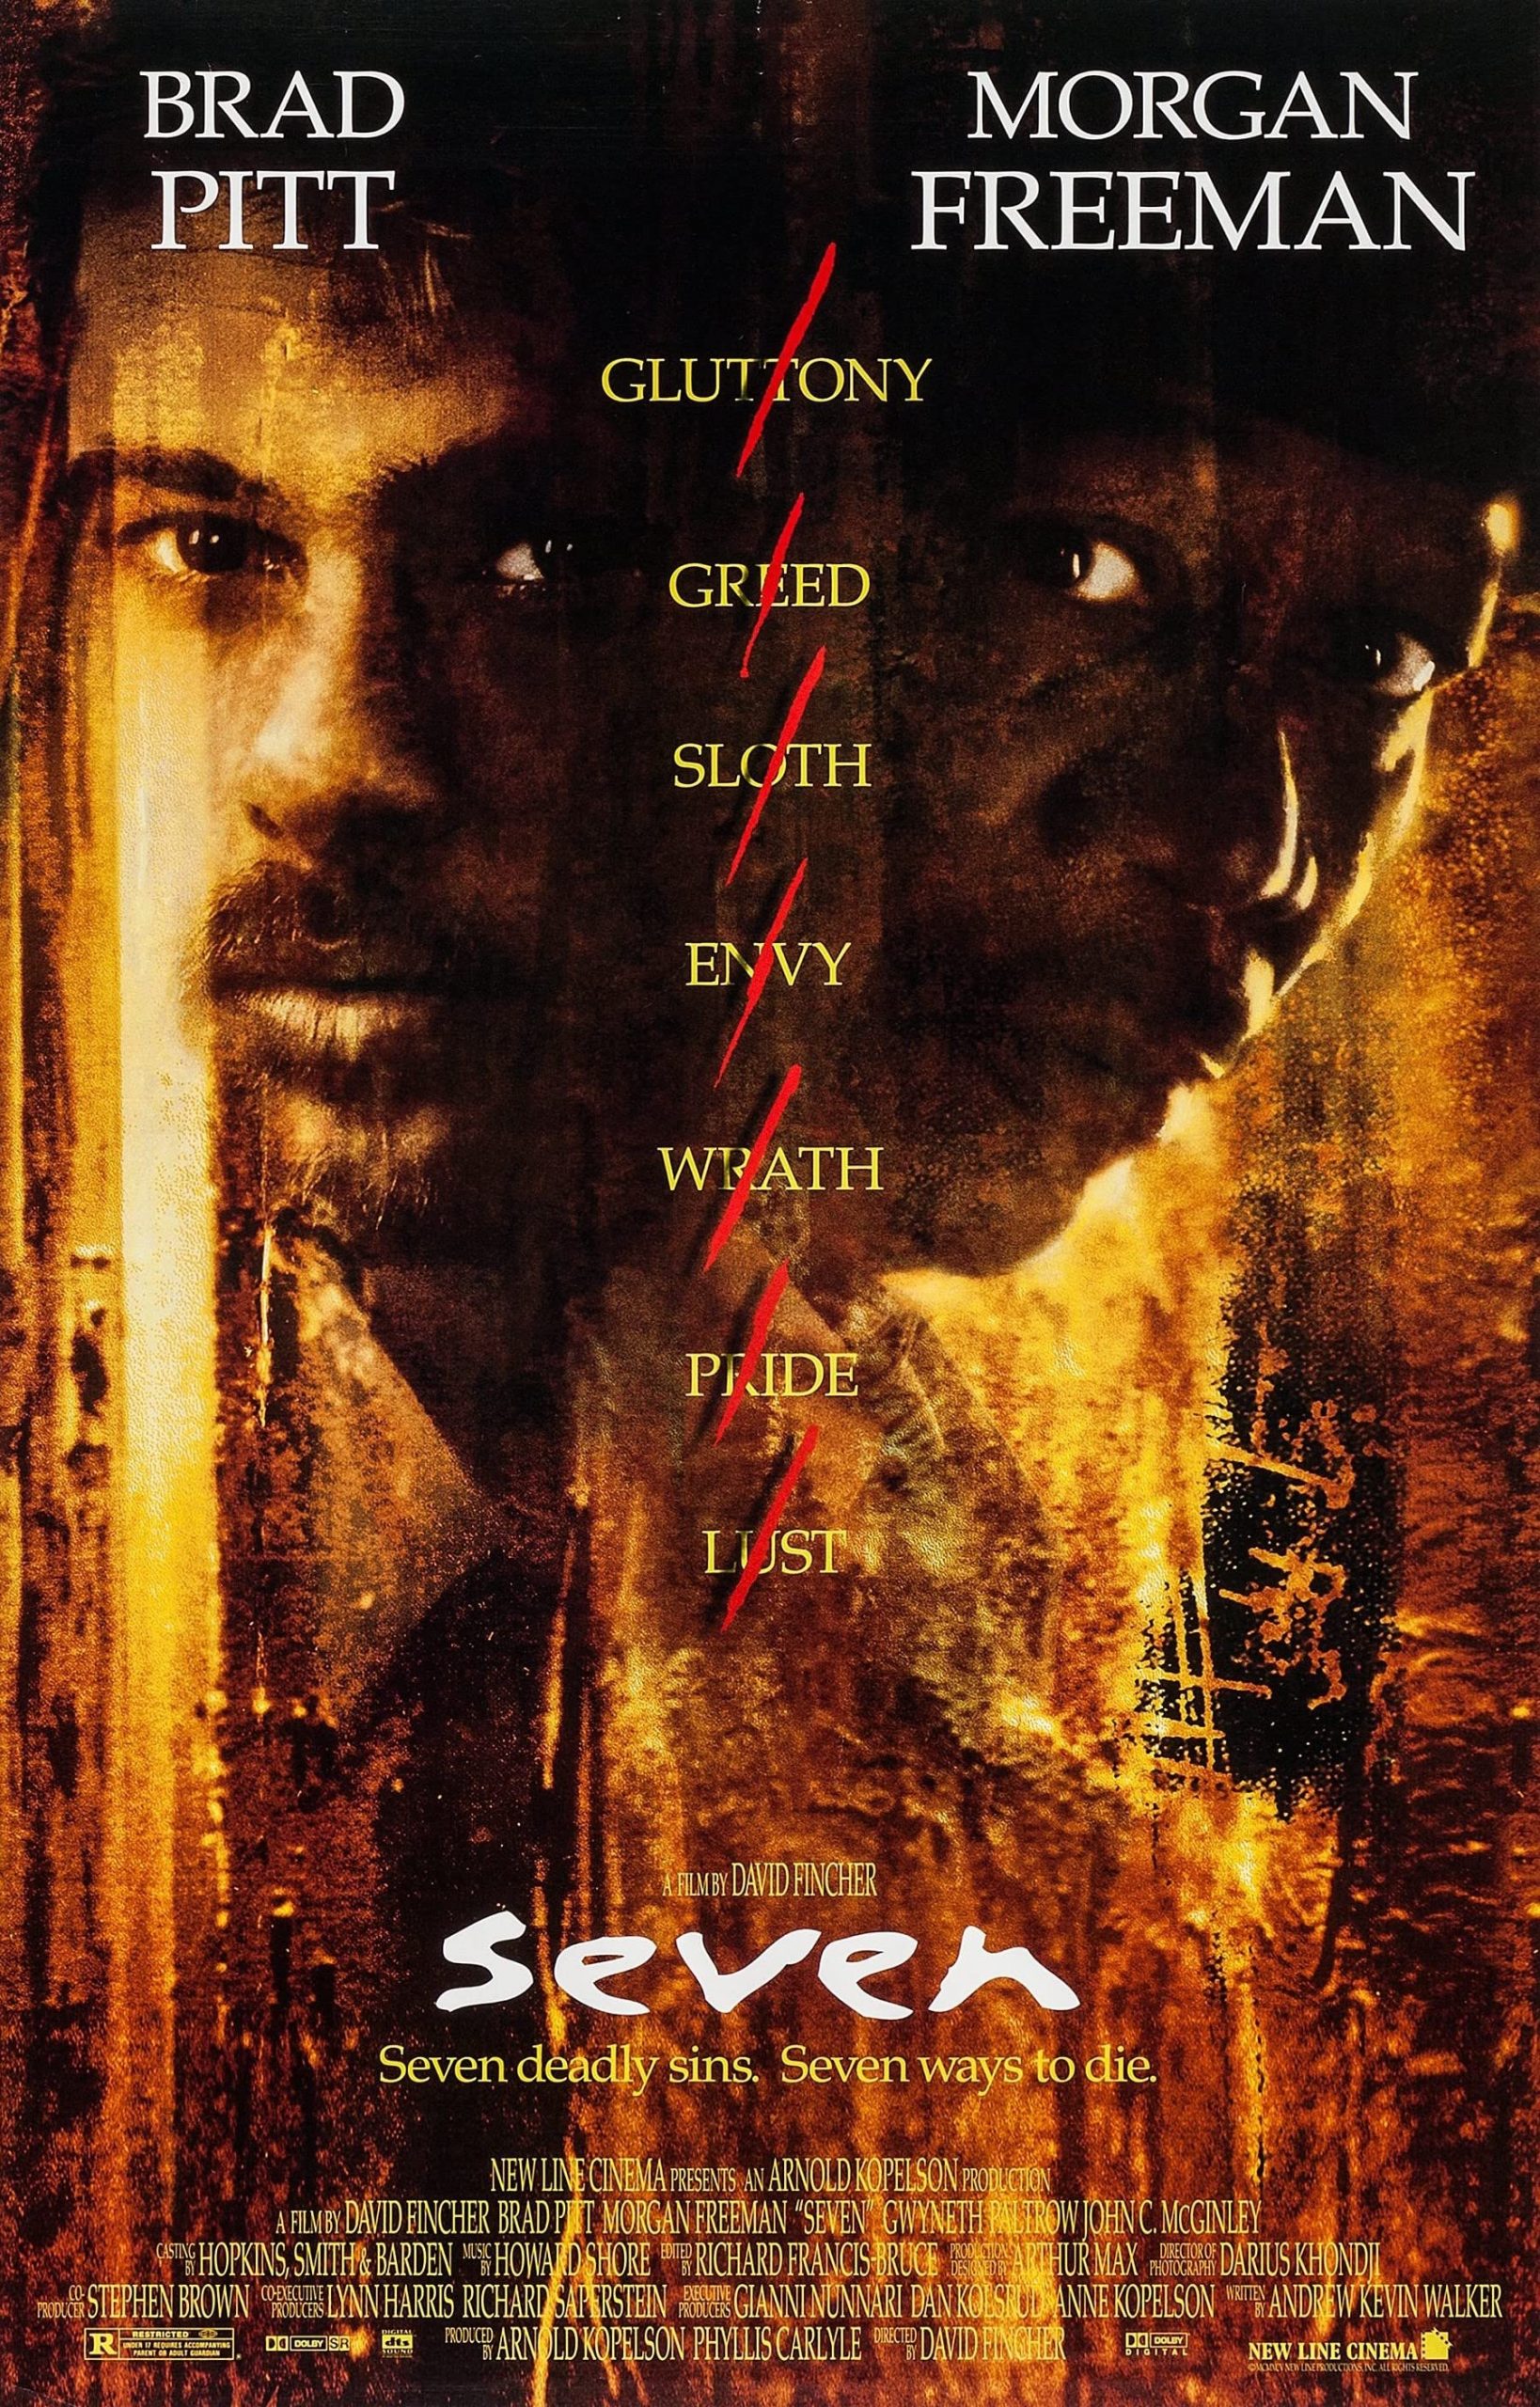 Movie poster for Seven featuring the faces of Brad Pitt and Morgan Freeman and a list of the seven deadly sins.